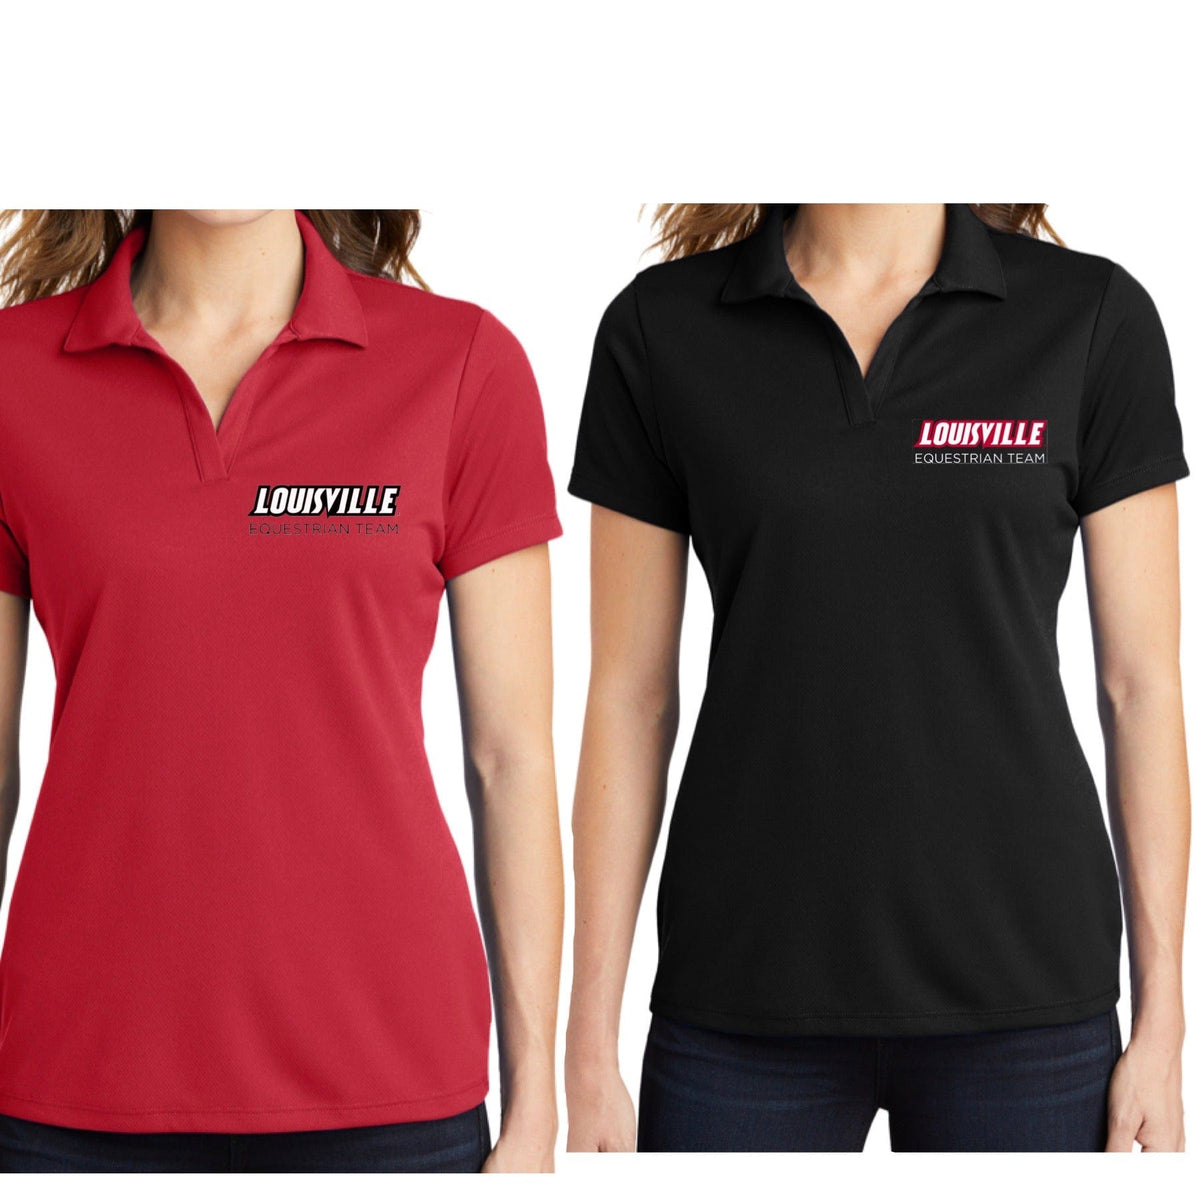 Equestrian Team Apparel Louisville Equestrian Team Hunt Seat Polo Shirt equestrian team apparel online tack store mobile tack store custom farm apparel custom show stable clothing equestrian lifestyle horse show clothing riding clothes horses equestrian tack store